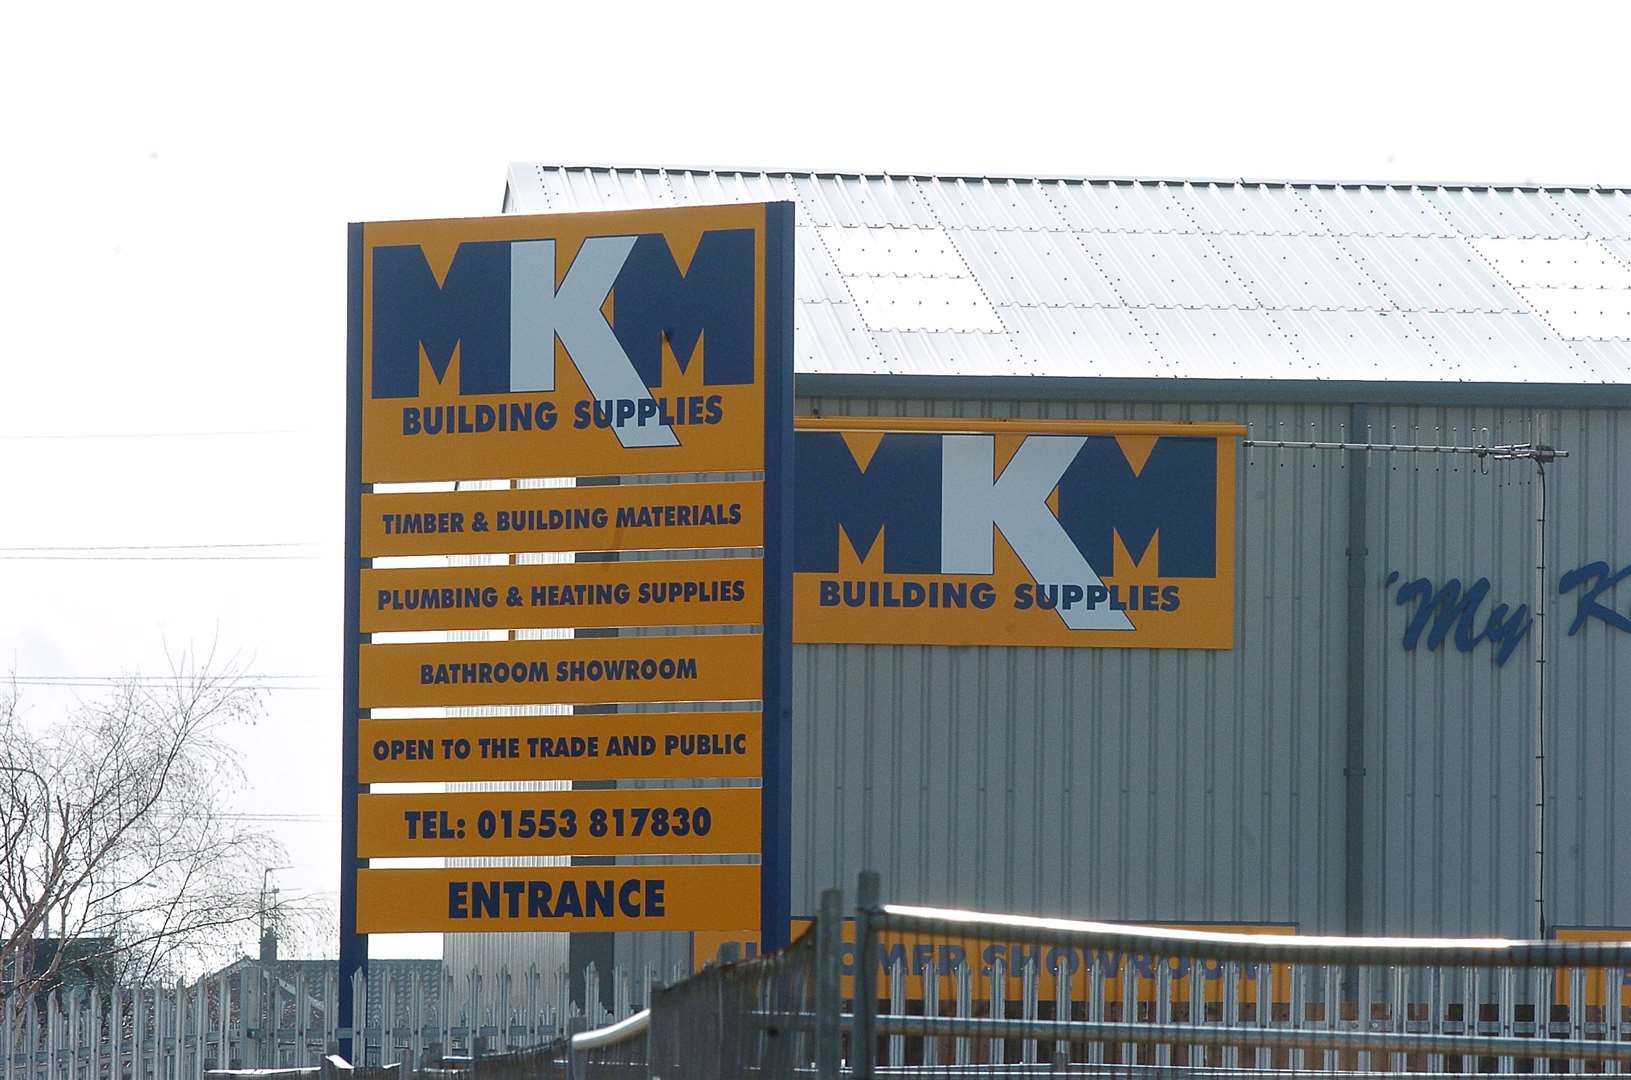 'MKM Building Supplies' will soon be opening its doors in the former Homebase unit